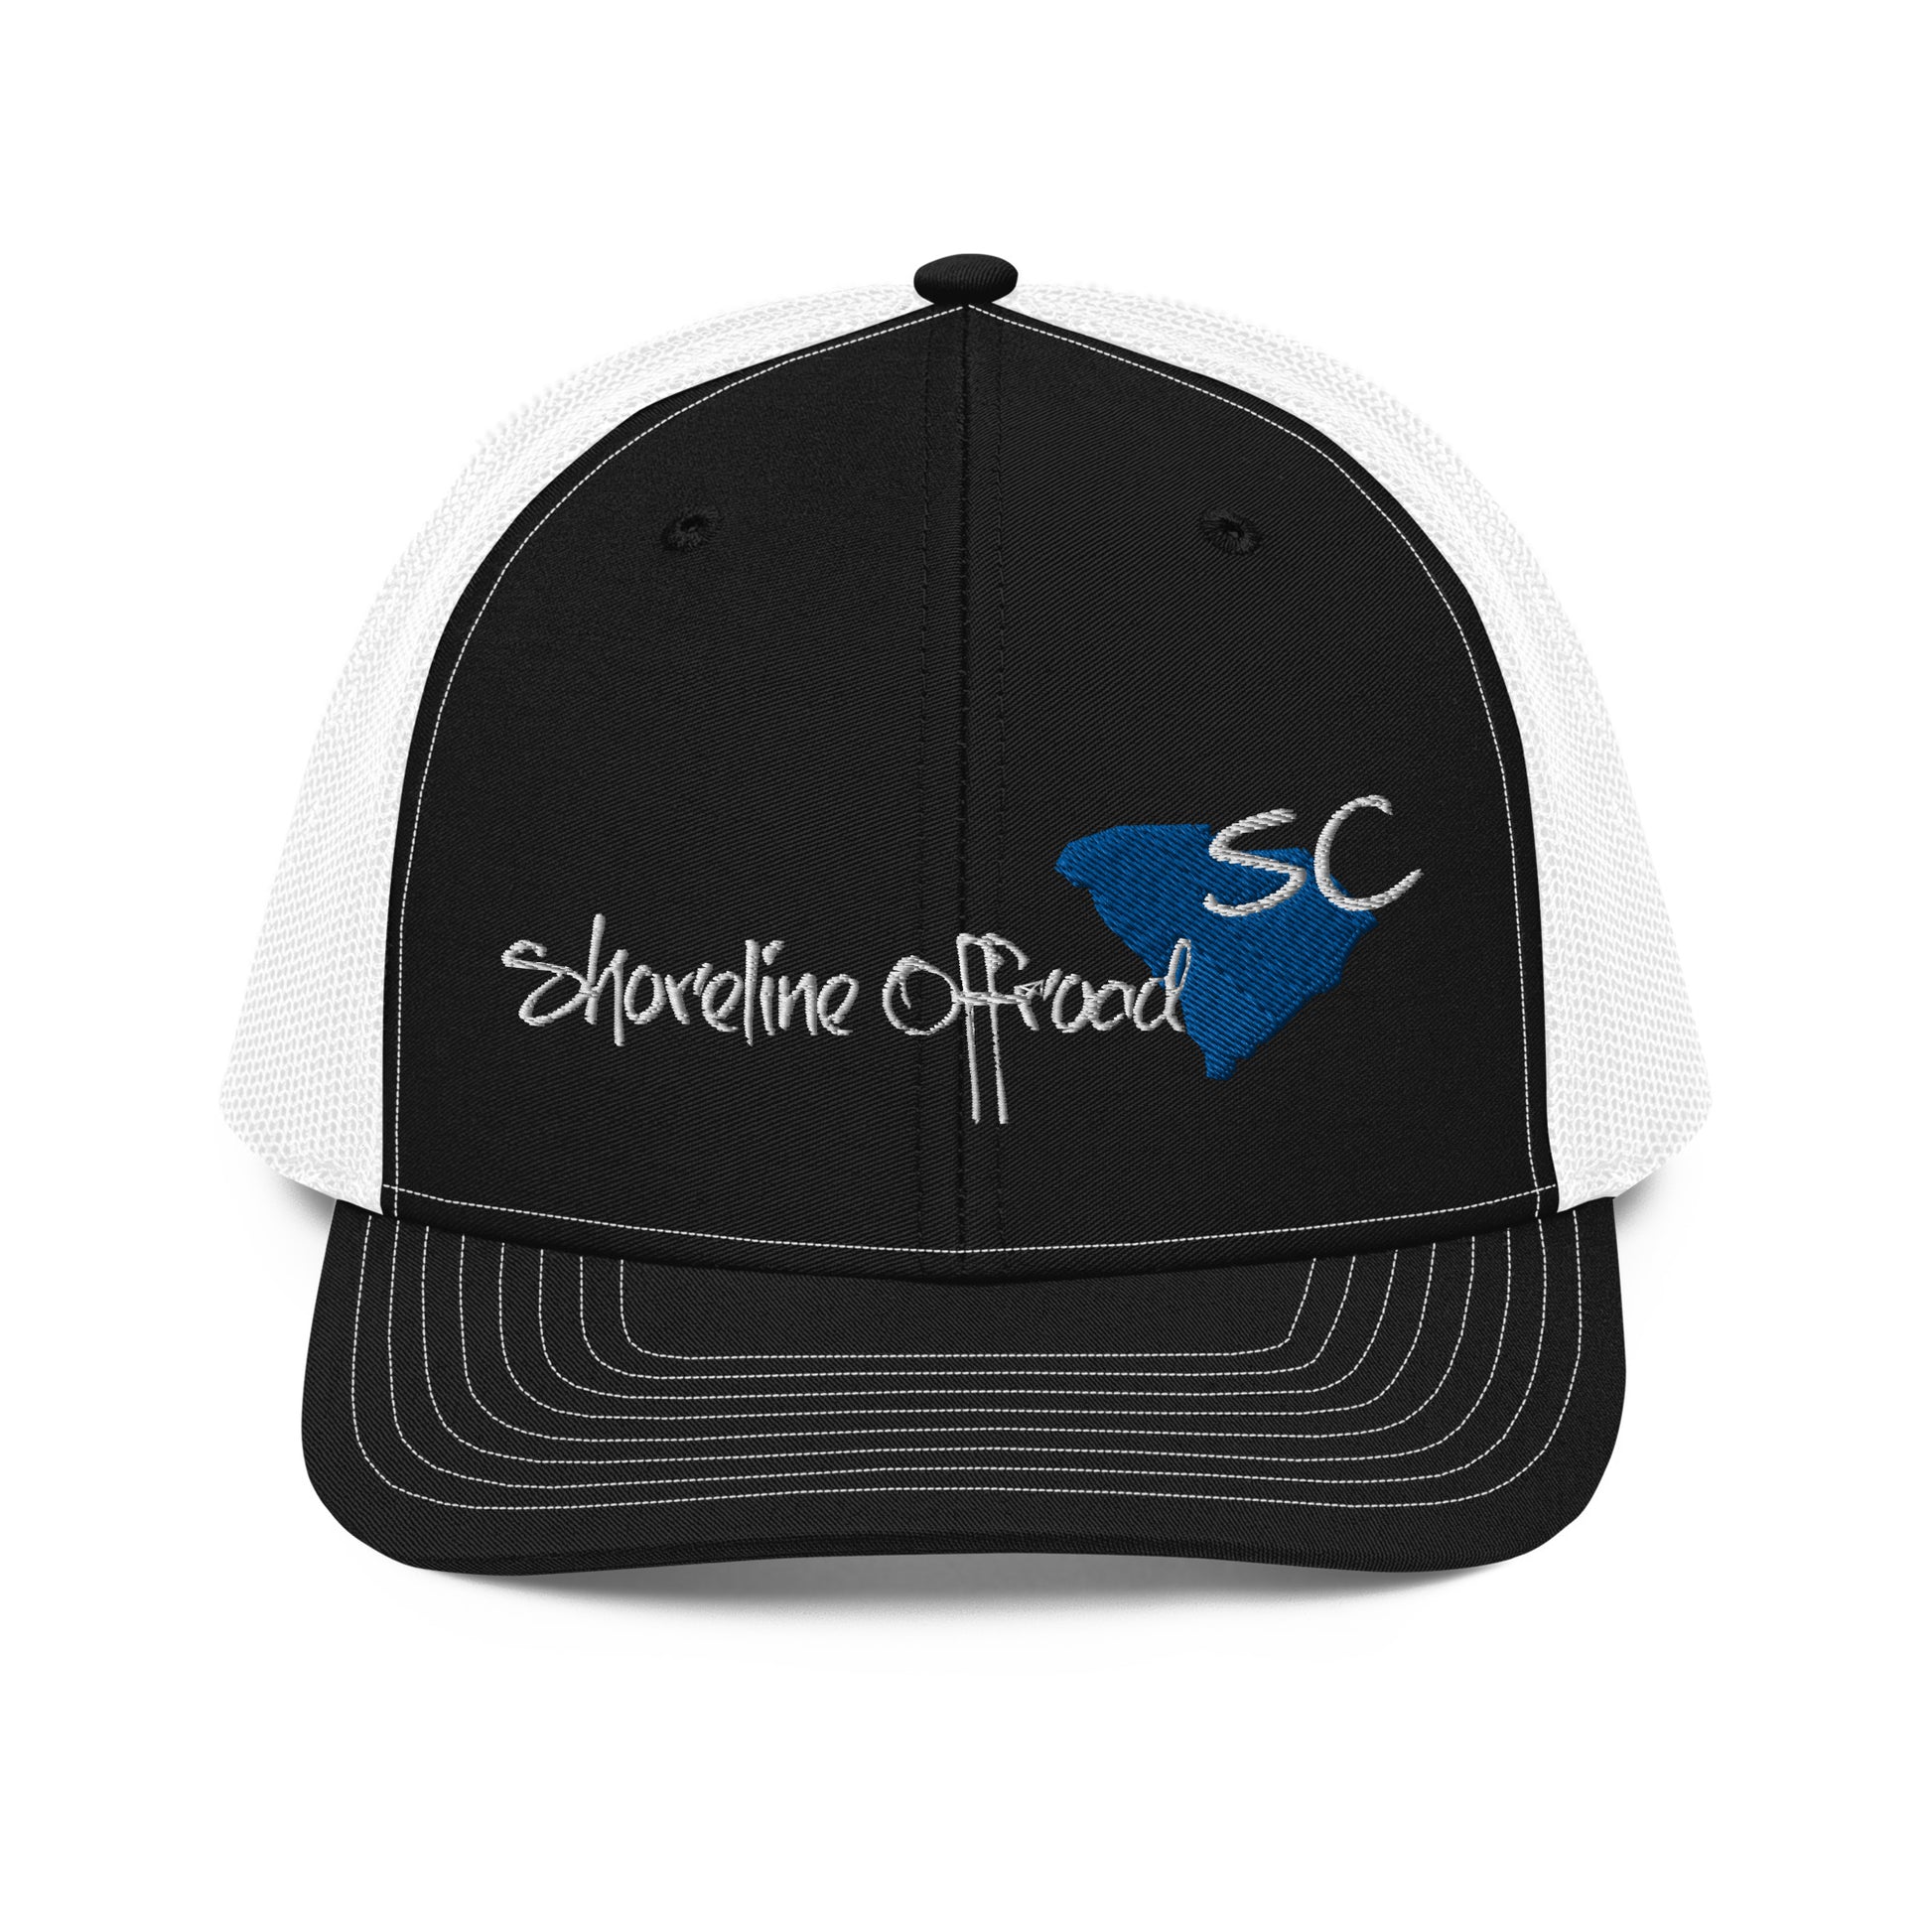 a black and white trucker hat with a blue and white logo